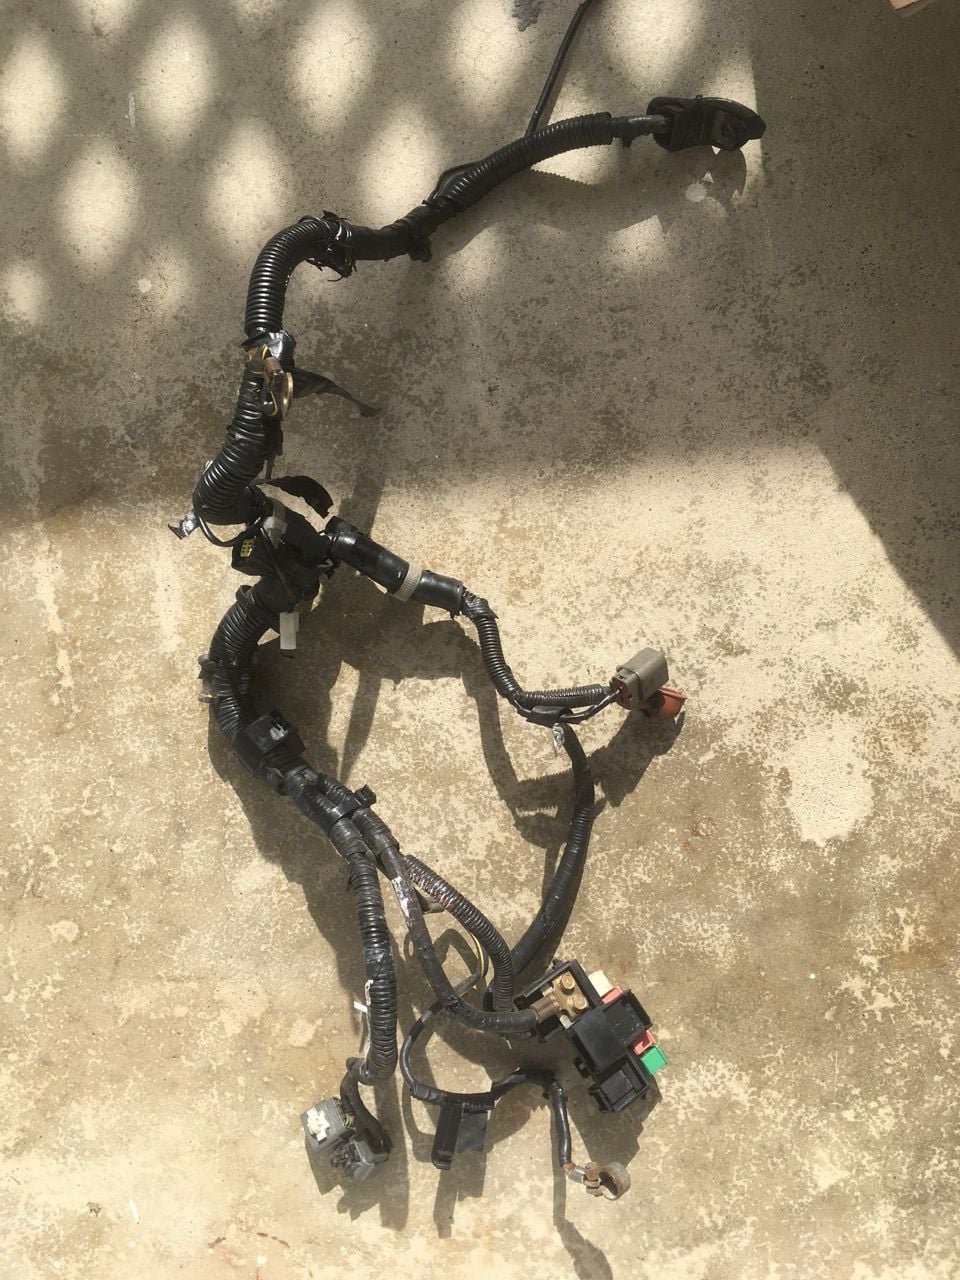 1993 Mazda RX-7 - battery harness - Engine - Electrical - $50 - Seal Beach, CA 90740, United States